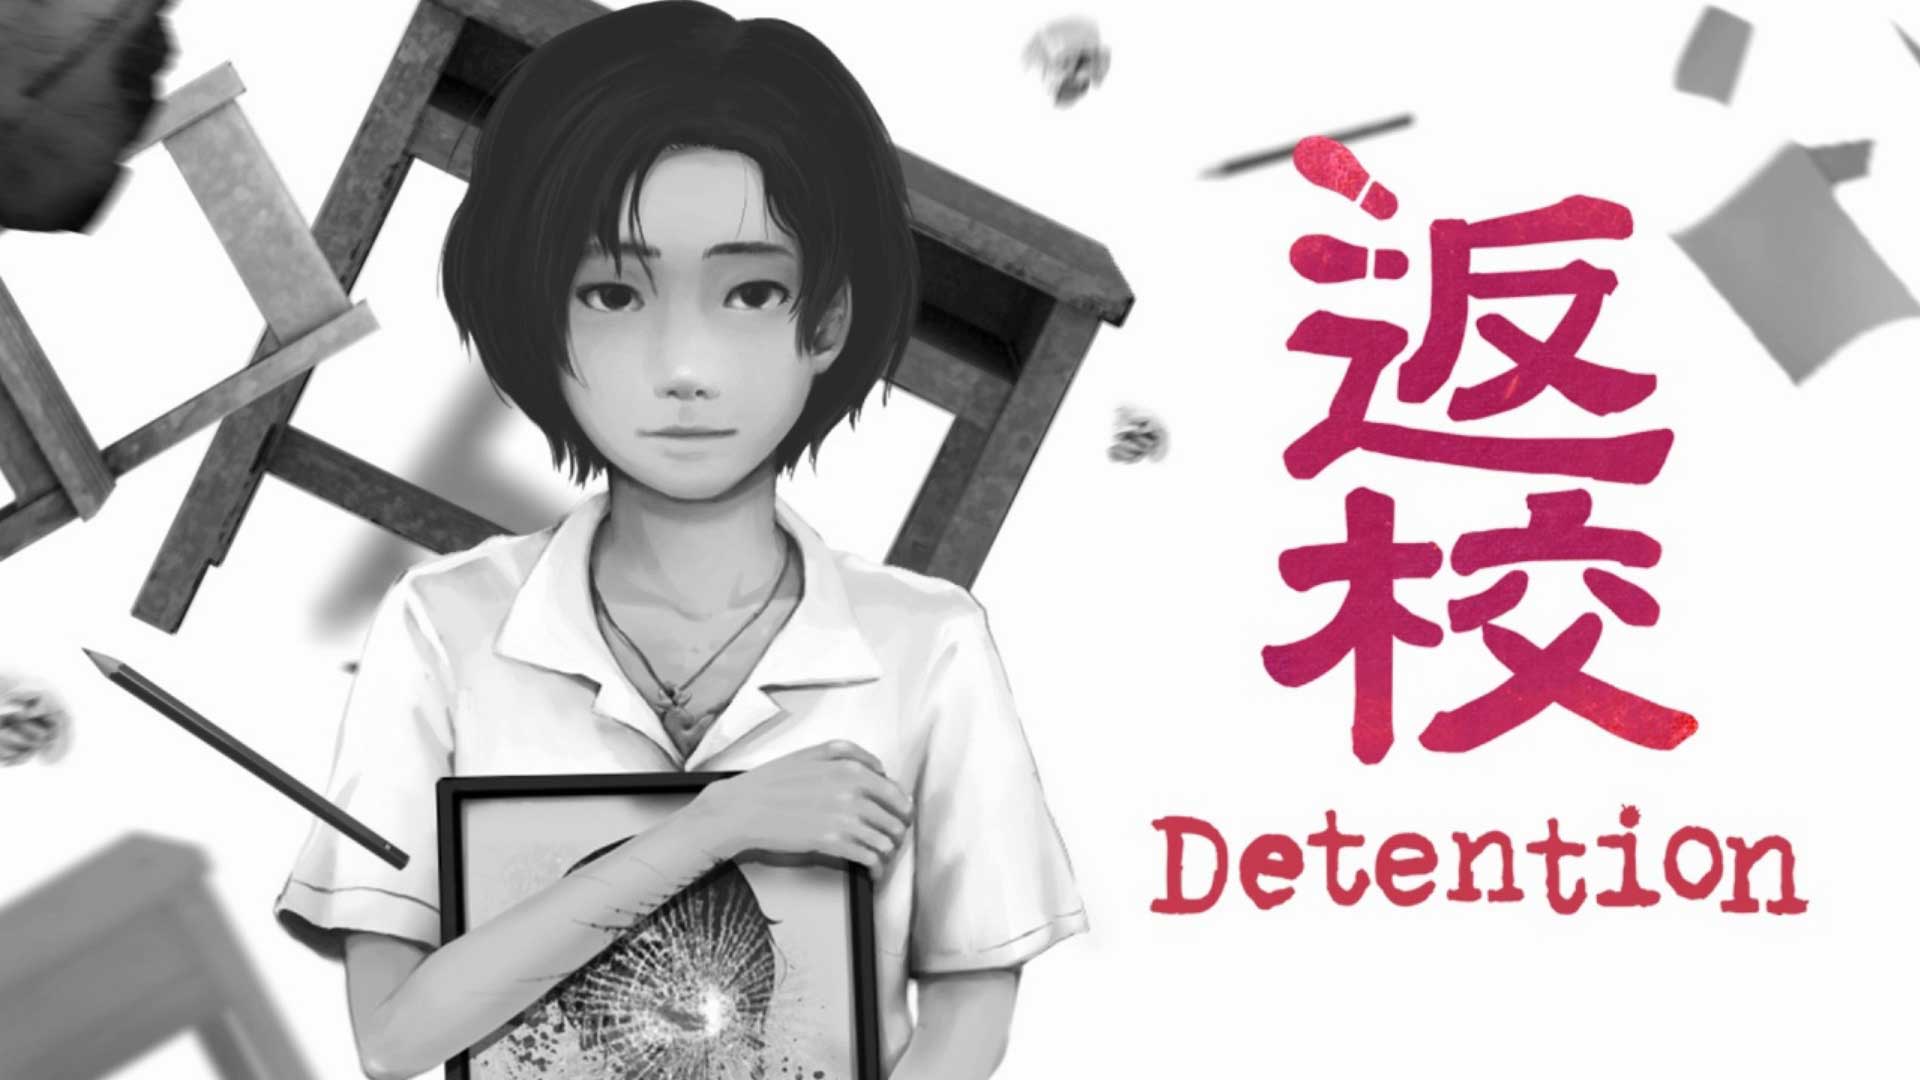 Android game Detention